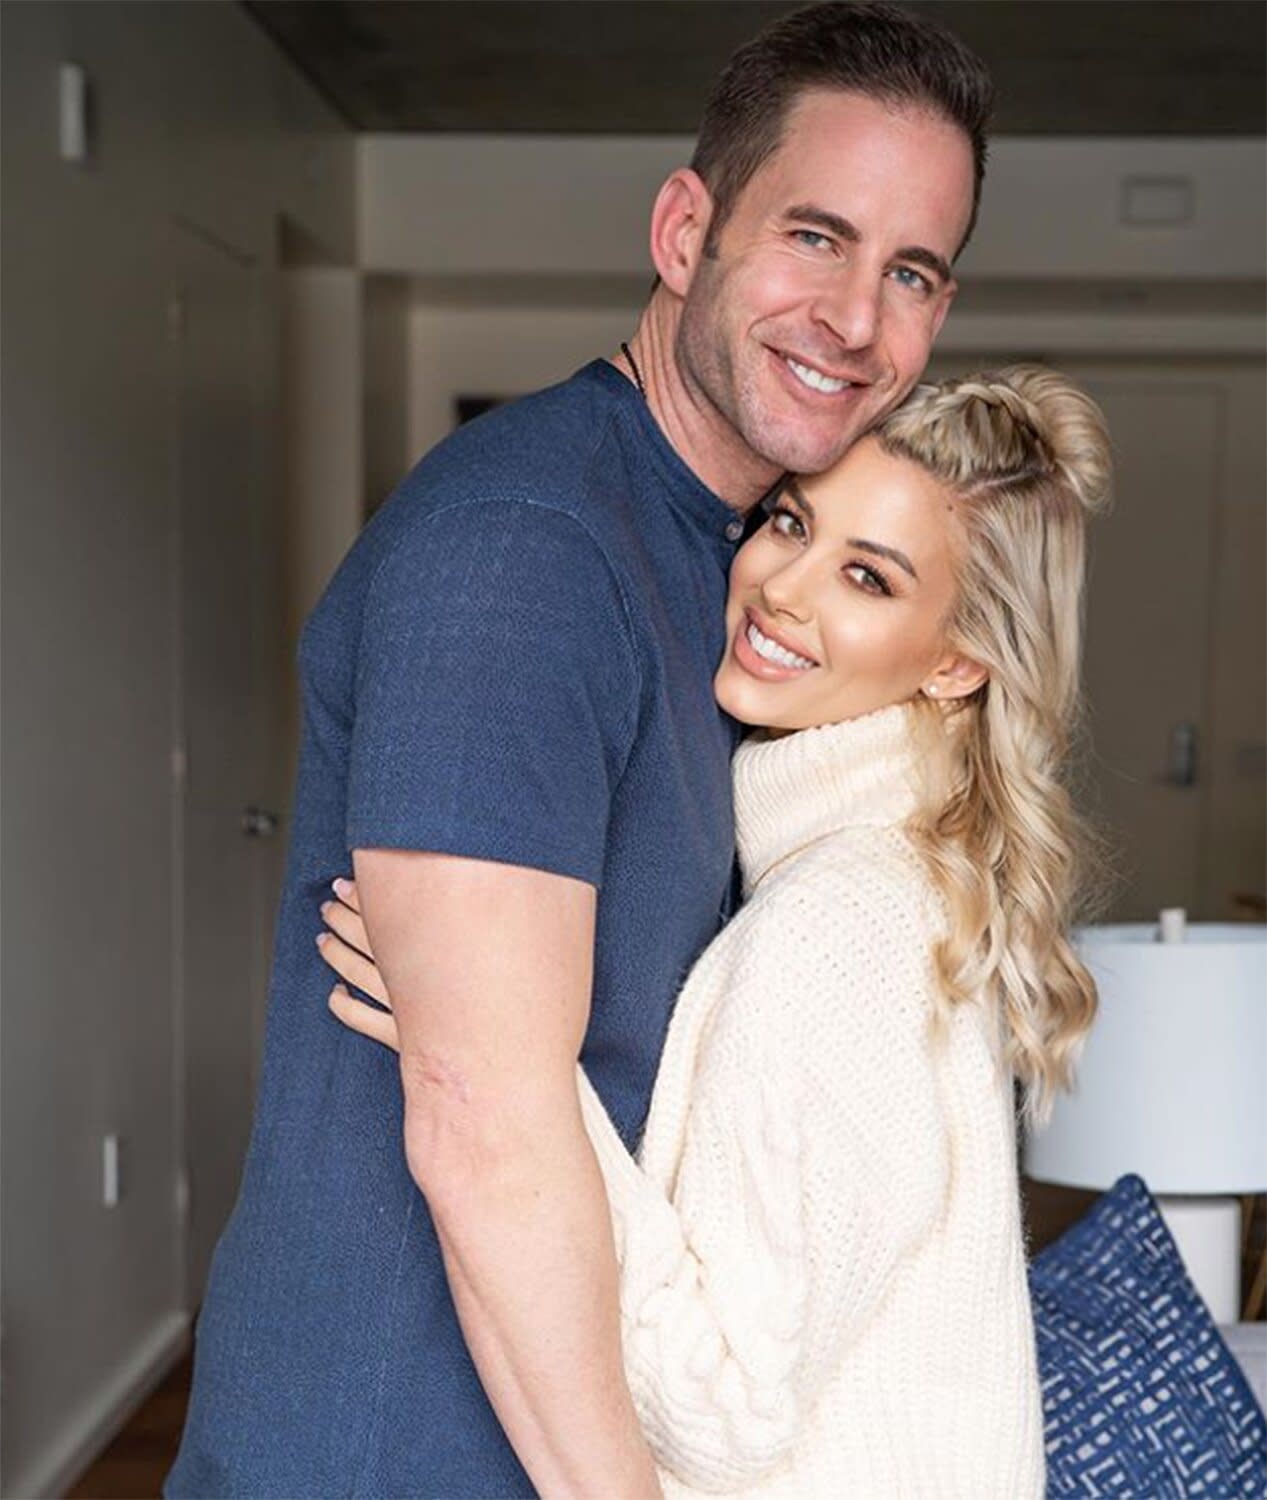 Tarek El Moussa reflects on how quickly his romance with bride Heather Rae Young has progressed